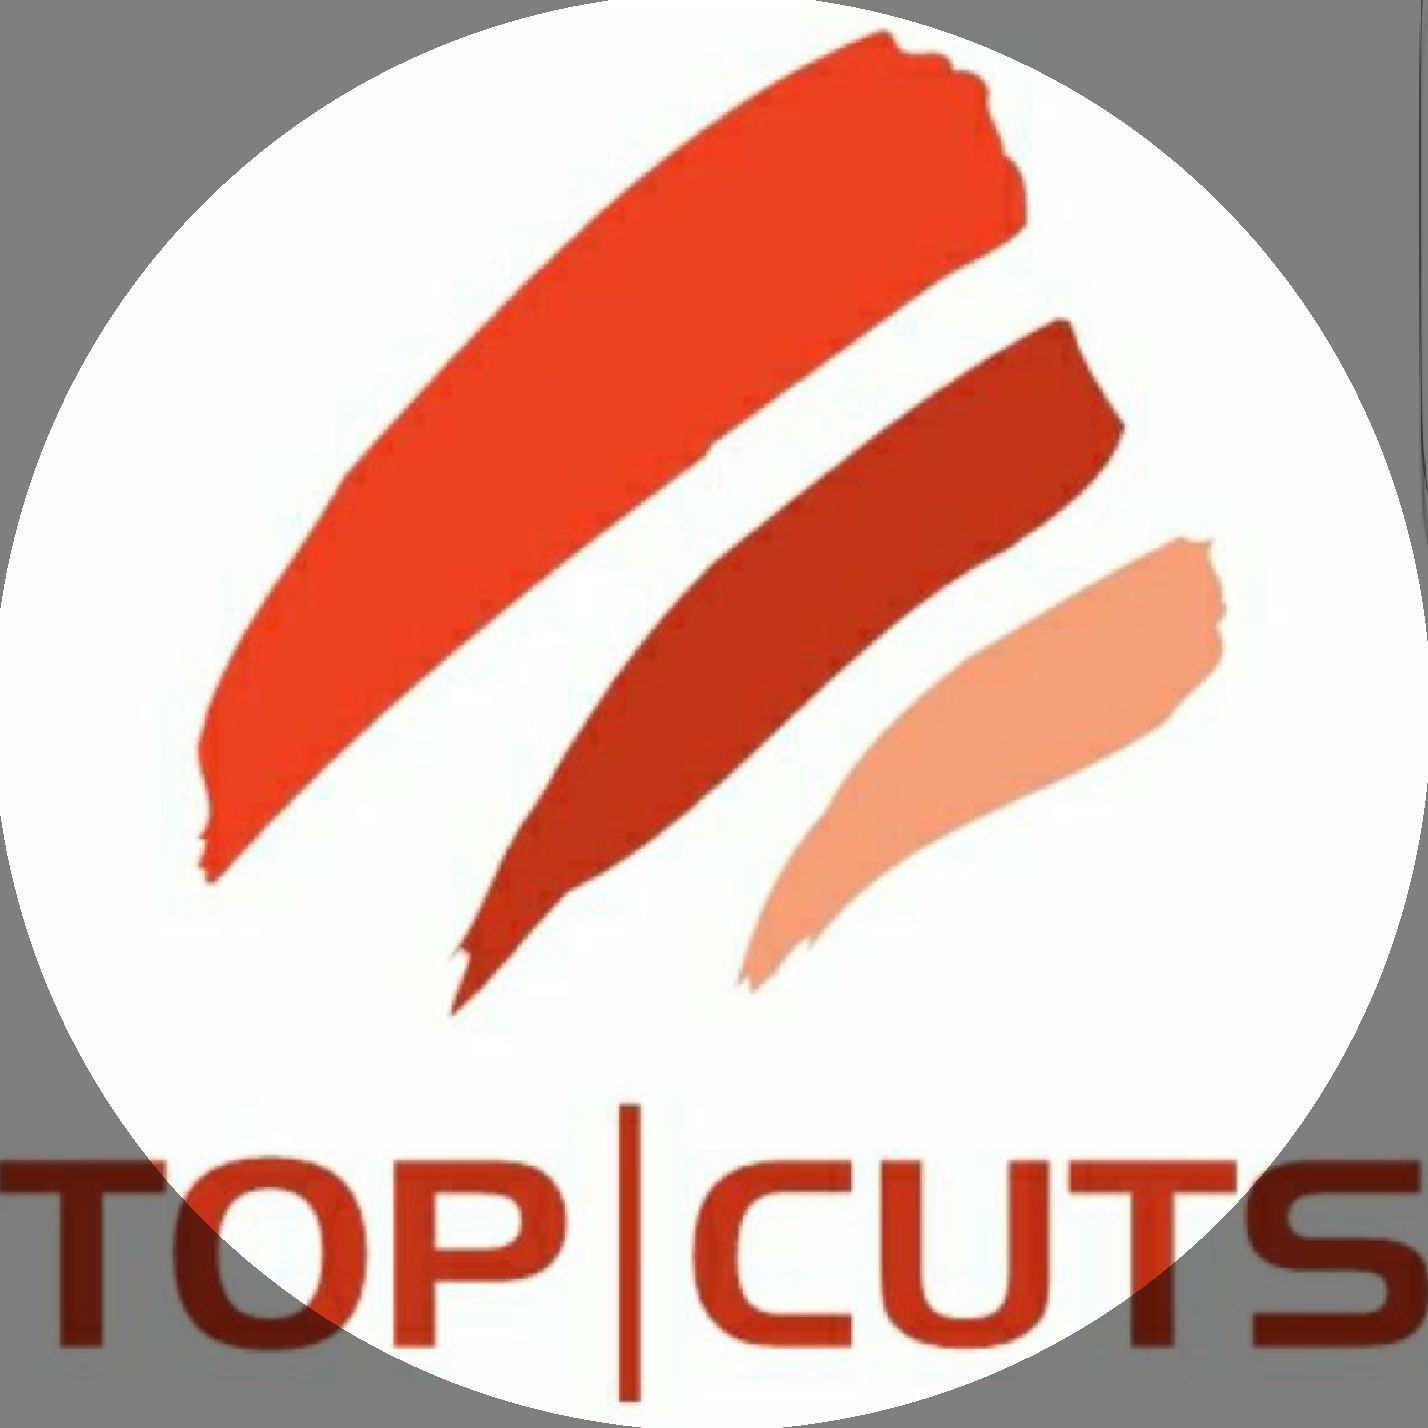 Top Cuts, 4970 A West Irlo Bronson Memorial Highway, Kissimmee, 34746